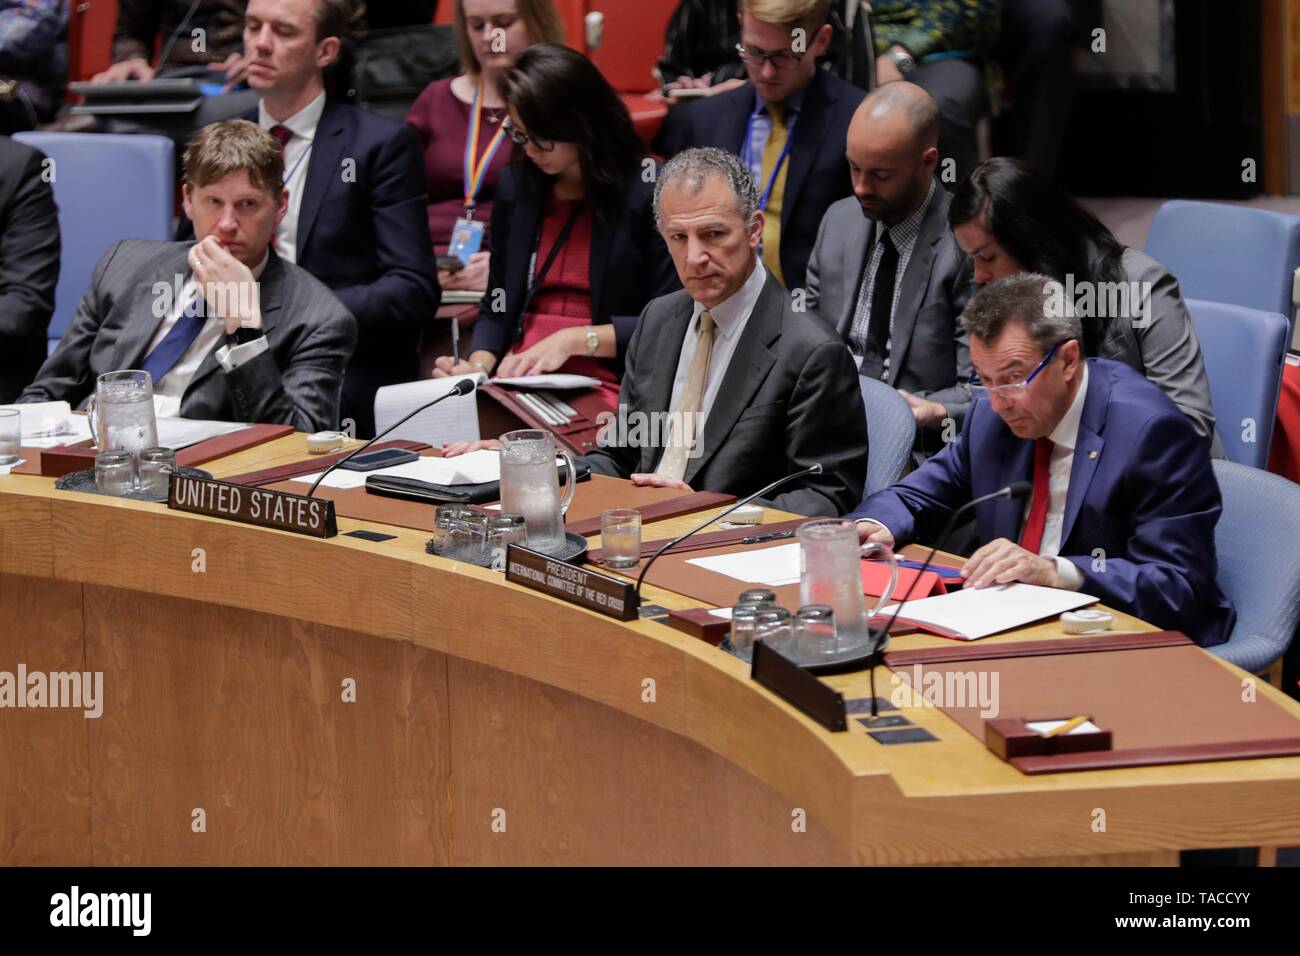 United Nations, New York, USA, May 23, 2019 - Jonathan Cohen the United States Ambassador to the United Nations during the Security Council debate on protection of civilians in armed conflict today at the UN Headquarters in New York. Photo: Luiz Rampelotto/EuropaNewswire PHOTO CREDIT MANDATORY. | usage worldwide Stock Photo